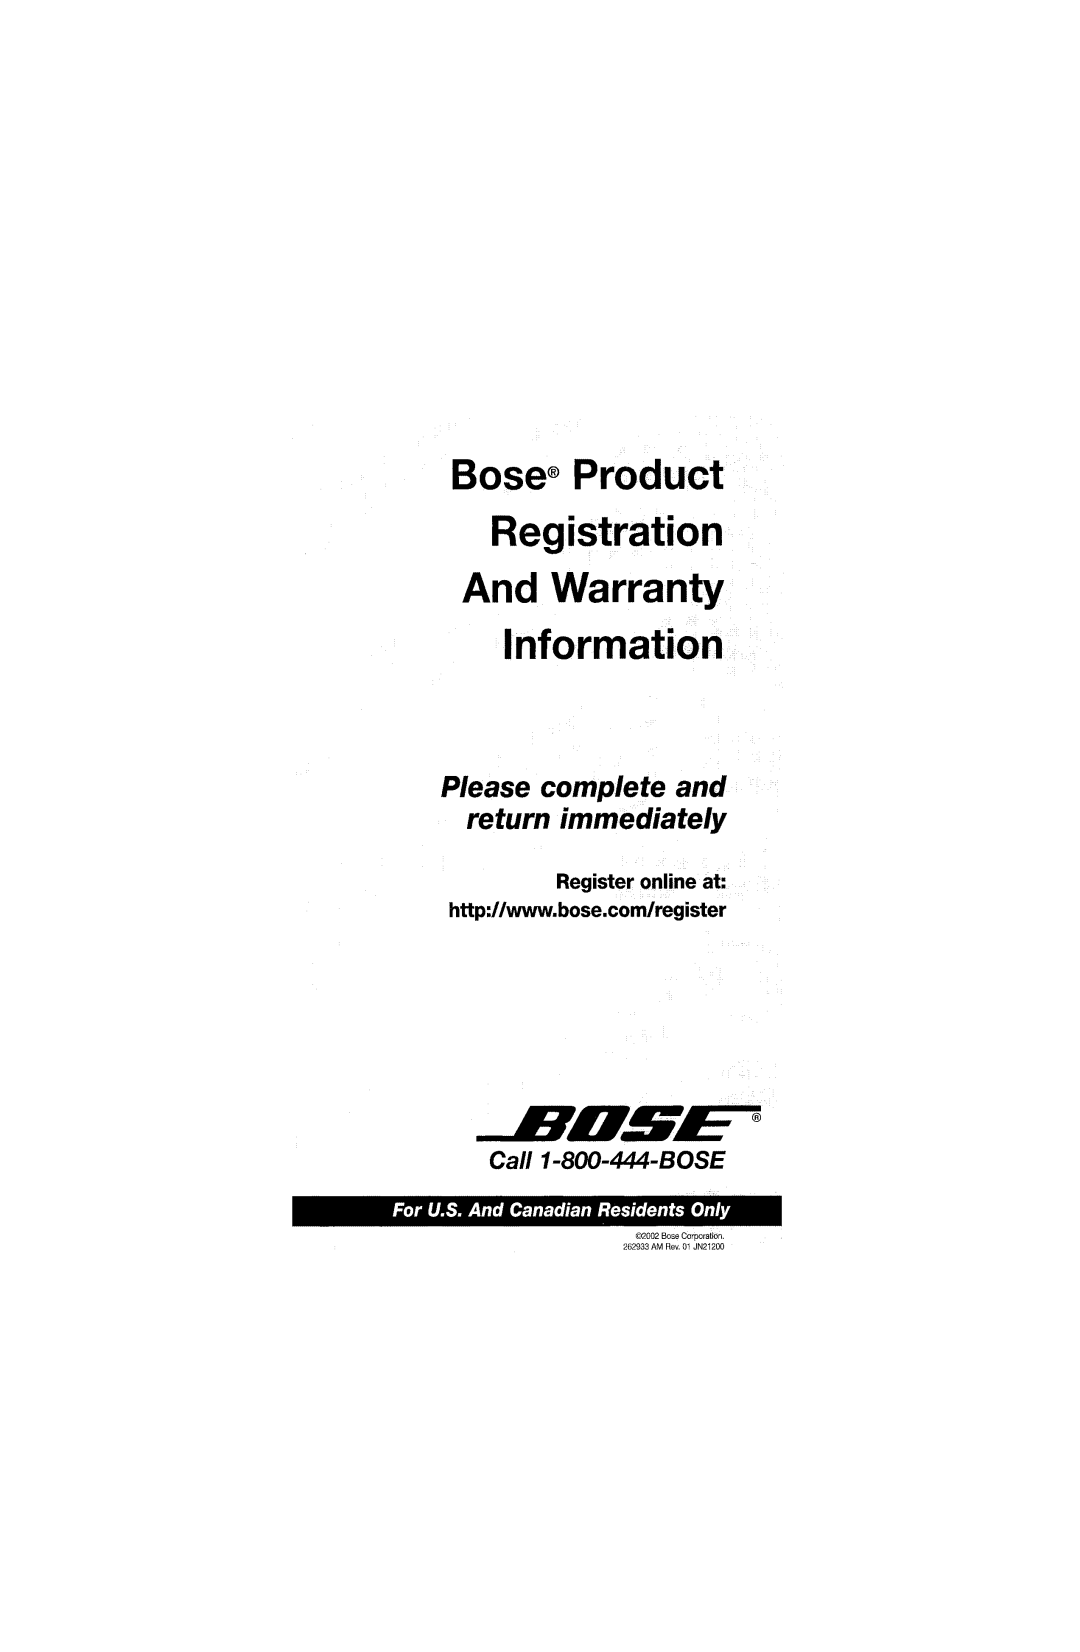 Bose am268612_00_v manual Bose Product Registration And Warranty, Information, ElO~, Please complete and return immediately 